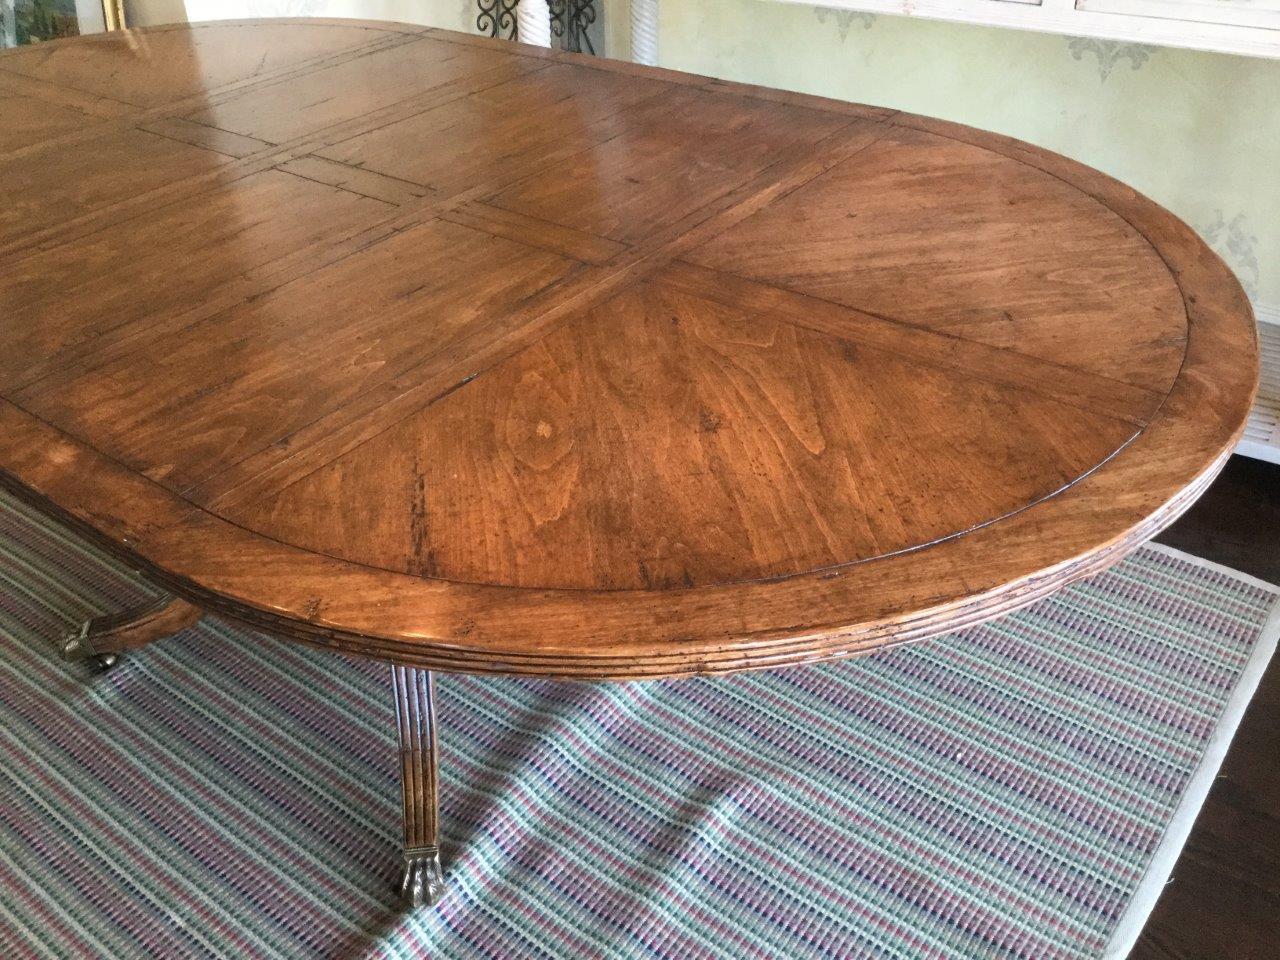 French Provincial Vintage Hendredon Round or Oblong Cherry Dining Table with 3 Leaves